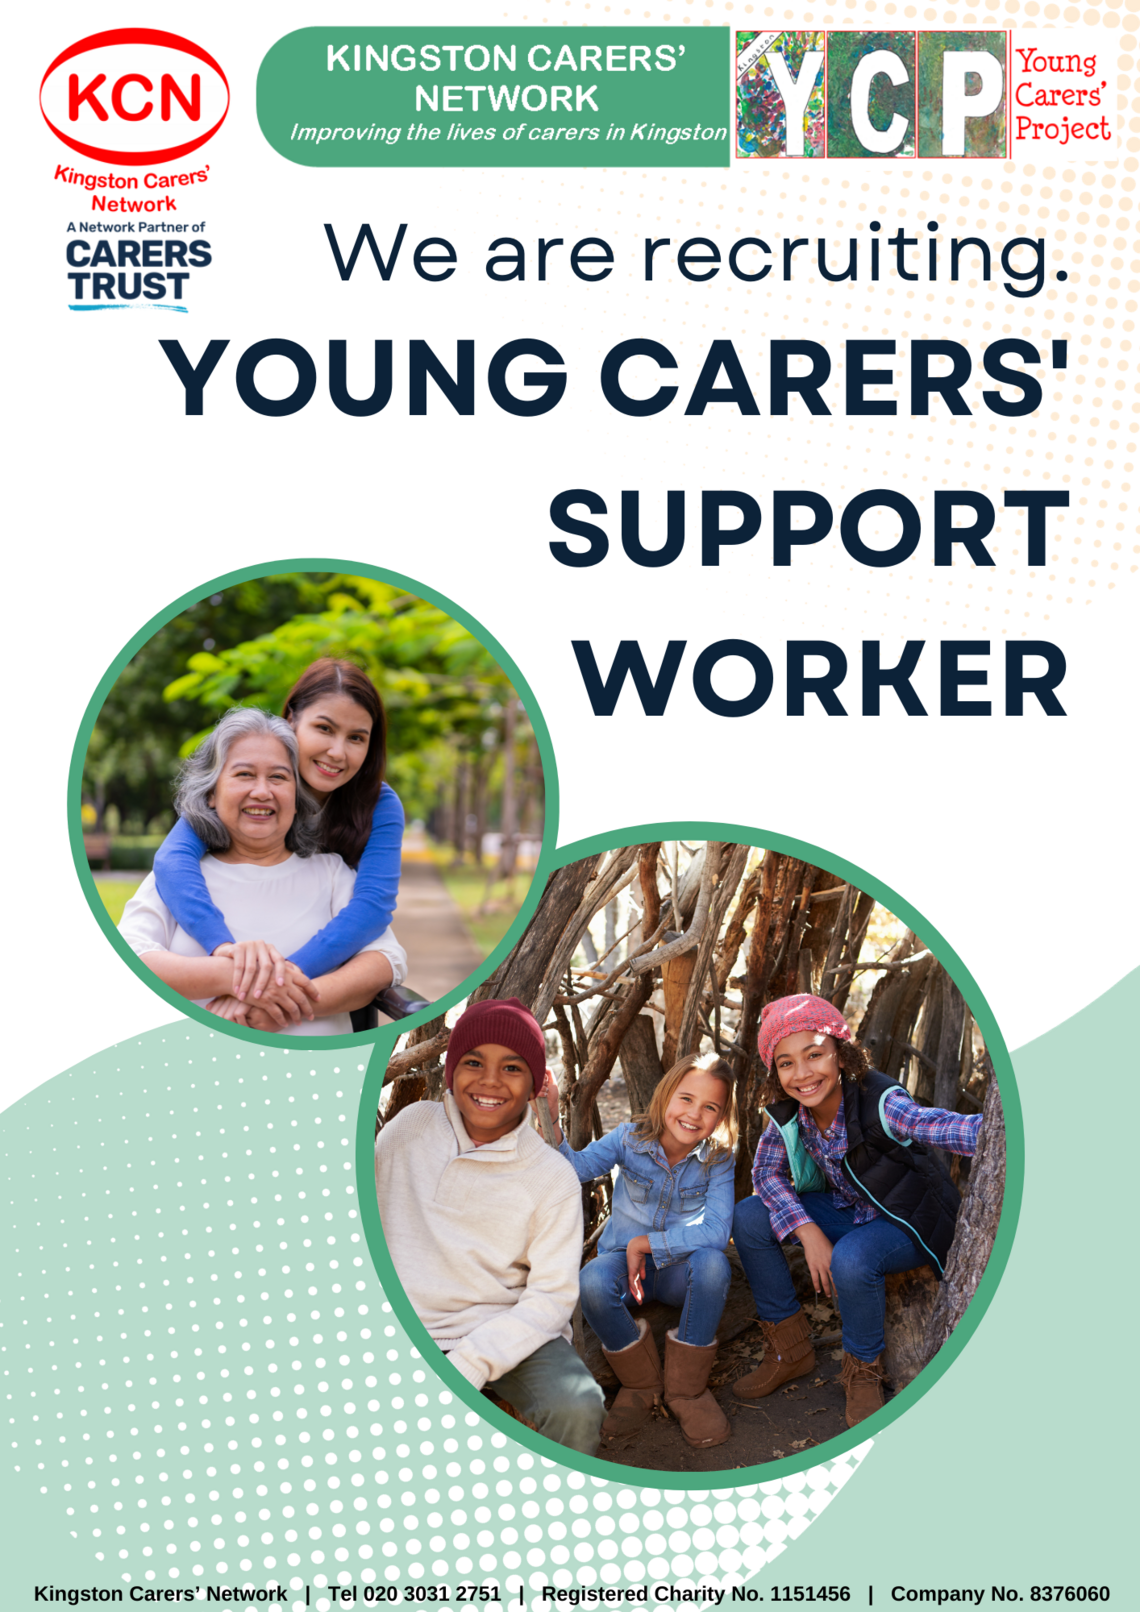 Young Carers' Support Worker